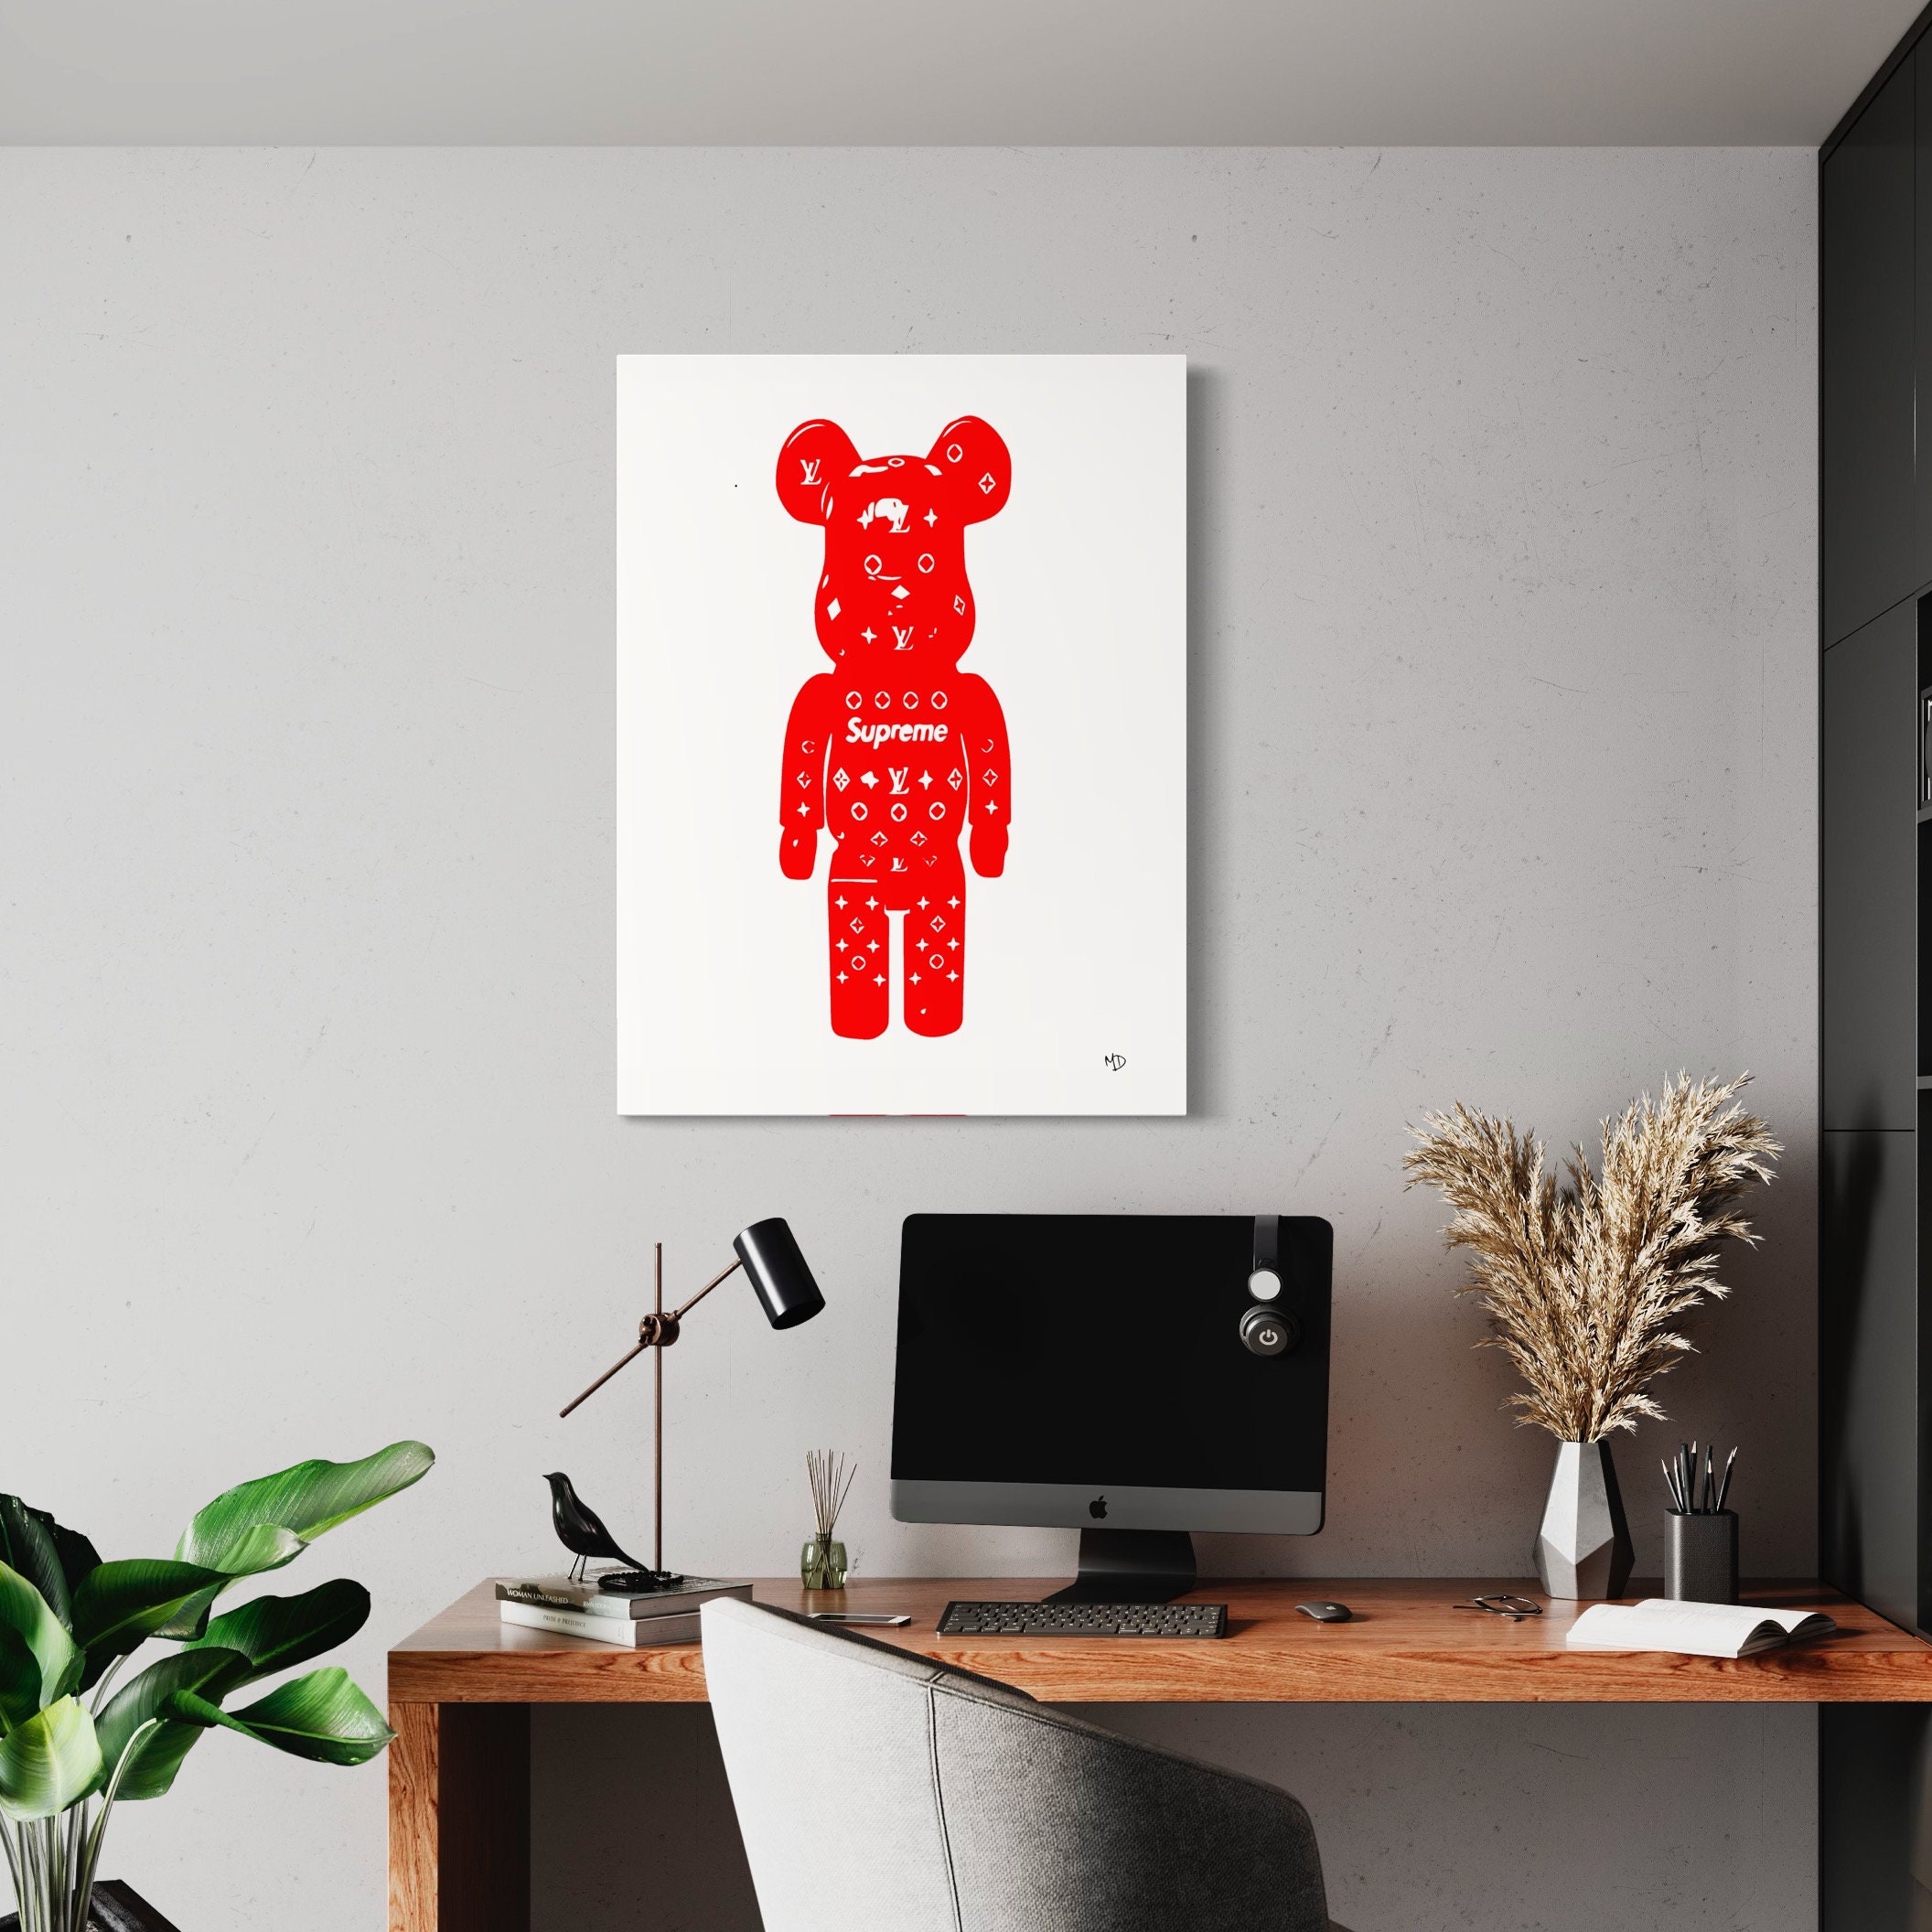 Umiami Bearbrick  Art Board Print for Sale by LaurenCastano